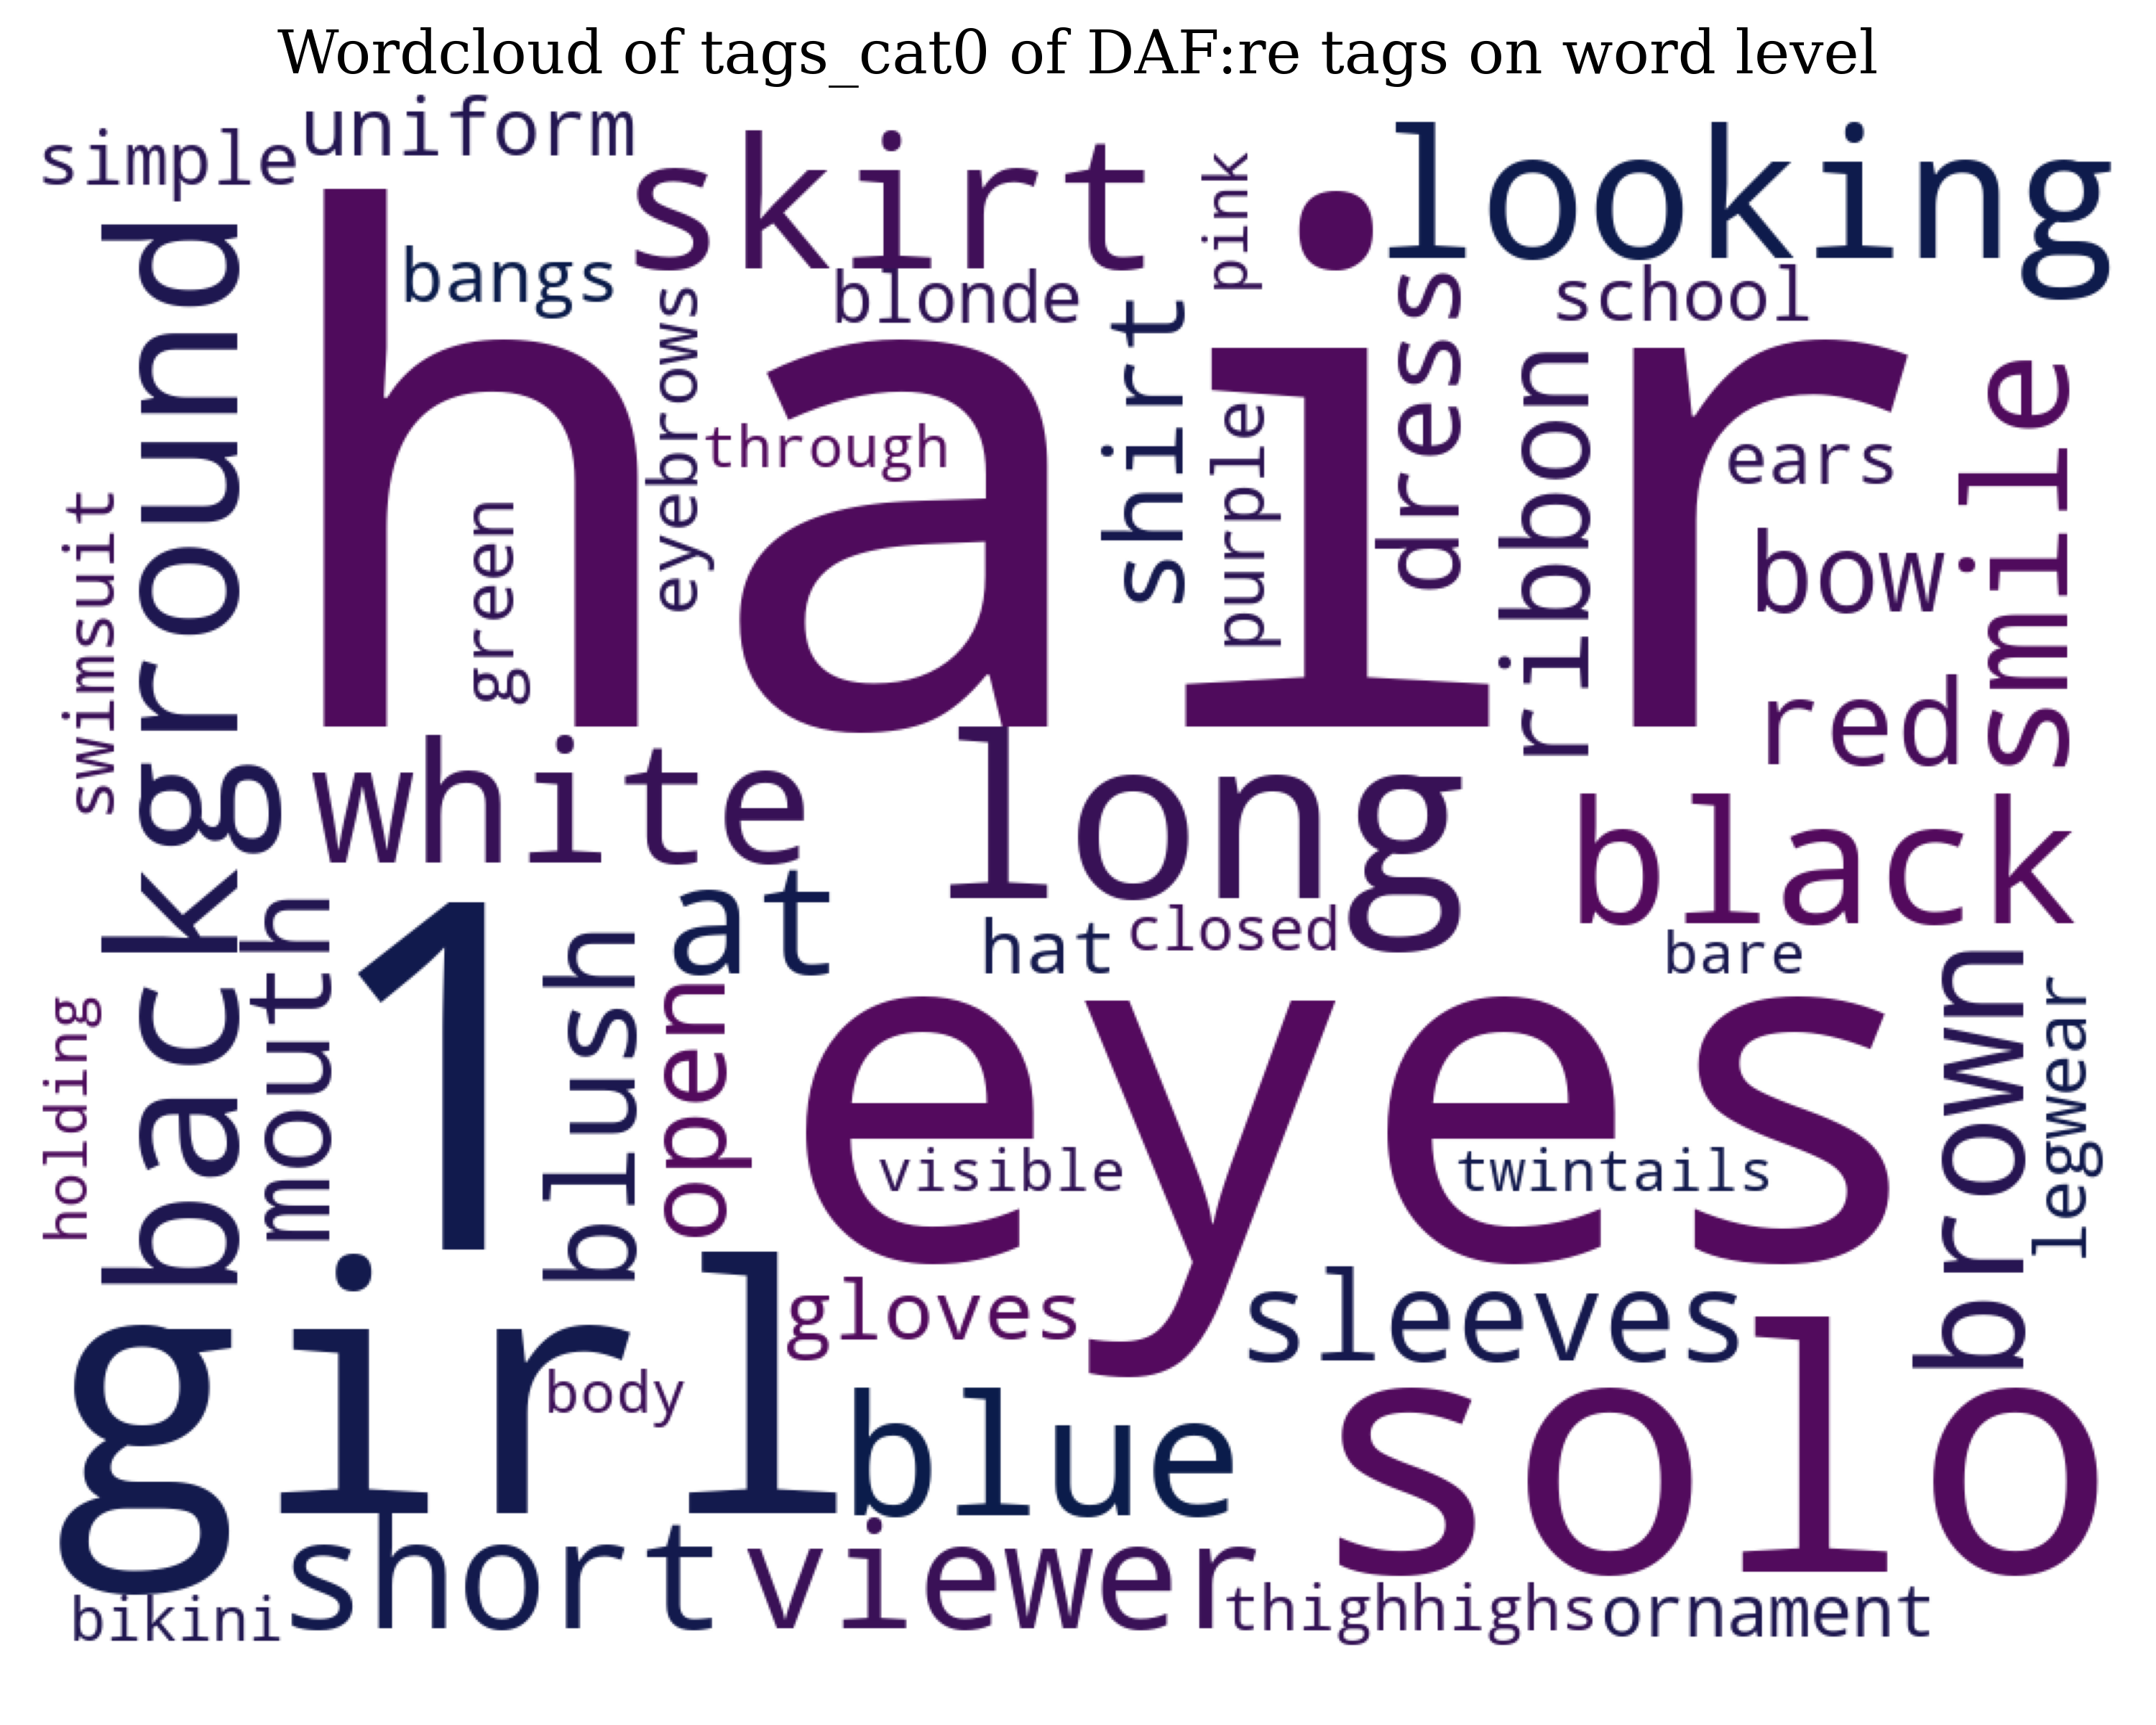 wordcloud_tags_cat0_wordlevel.png